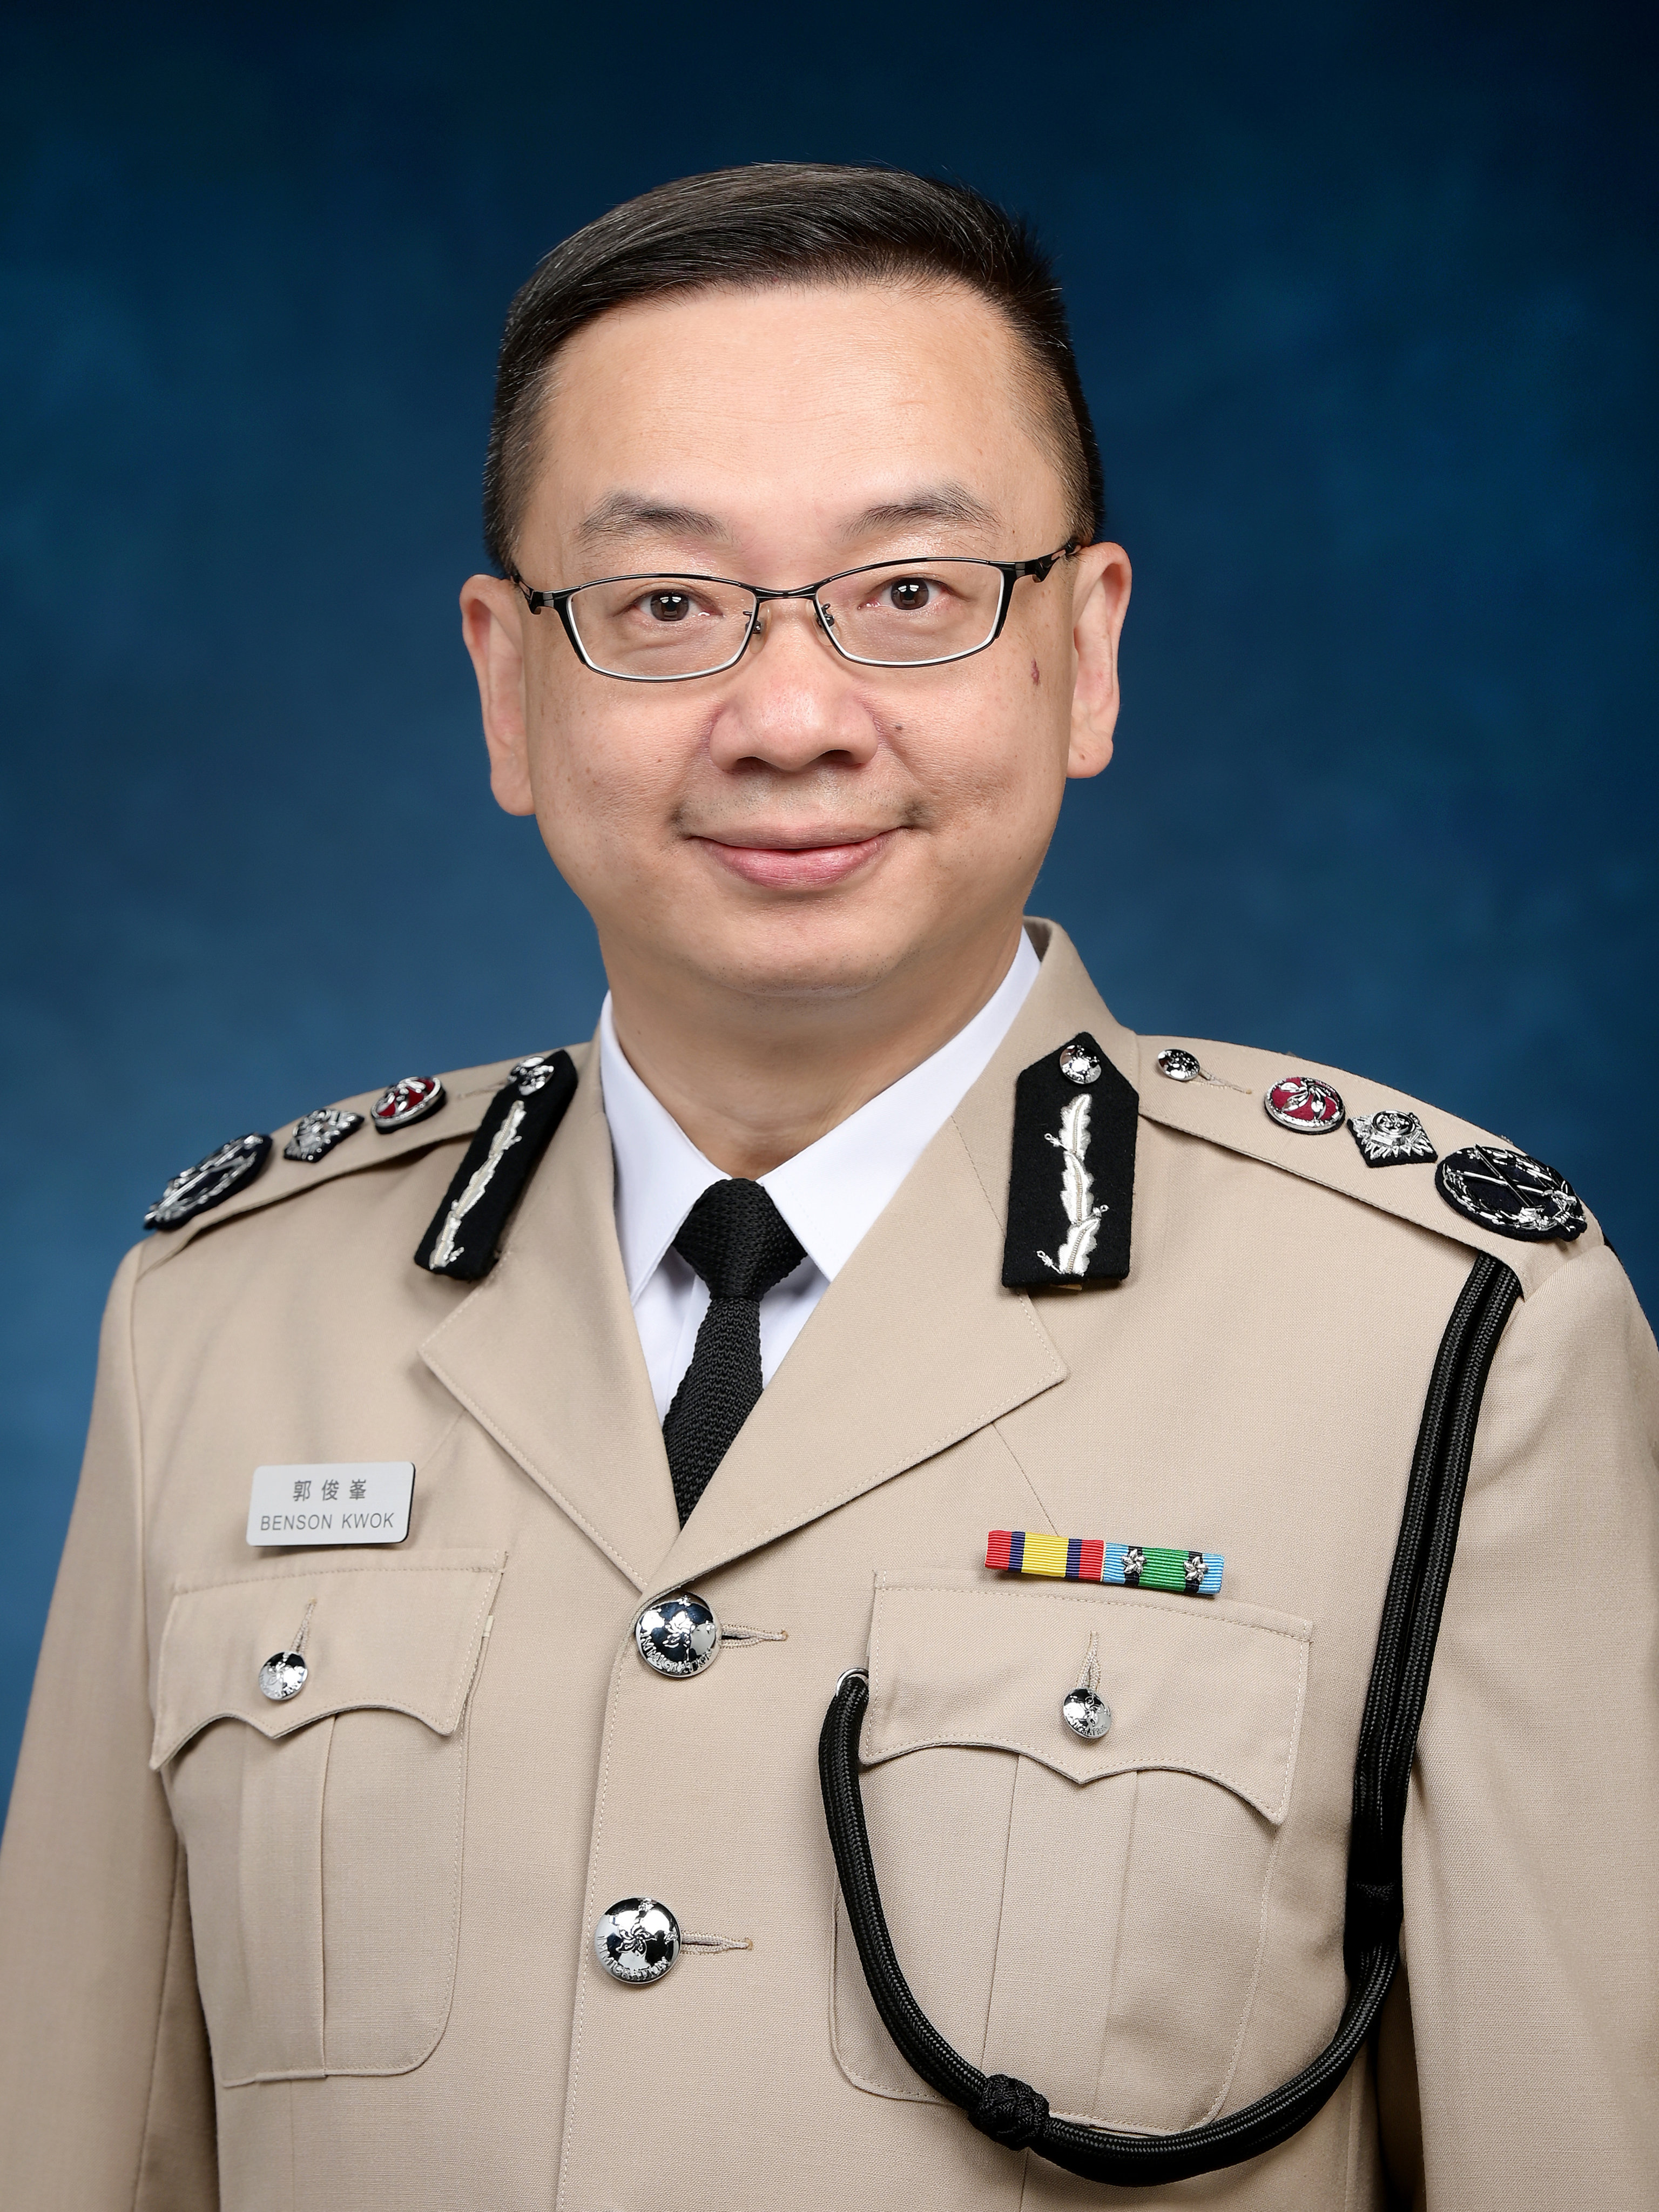 Benson Kwok will with immediate effect replace his predecessor on Tuesday as Hong Kong’s new immigration chief. Photo: Handout